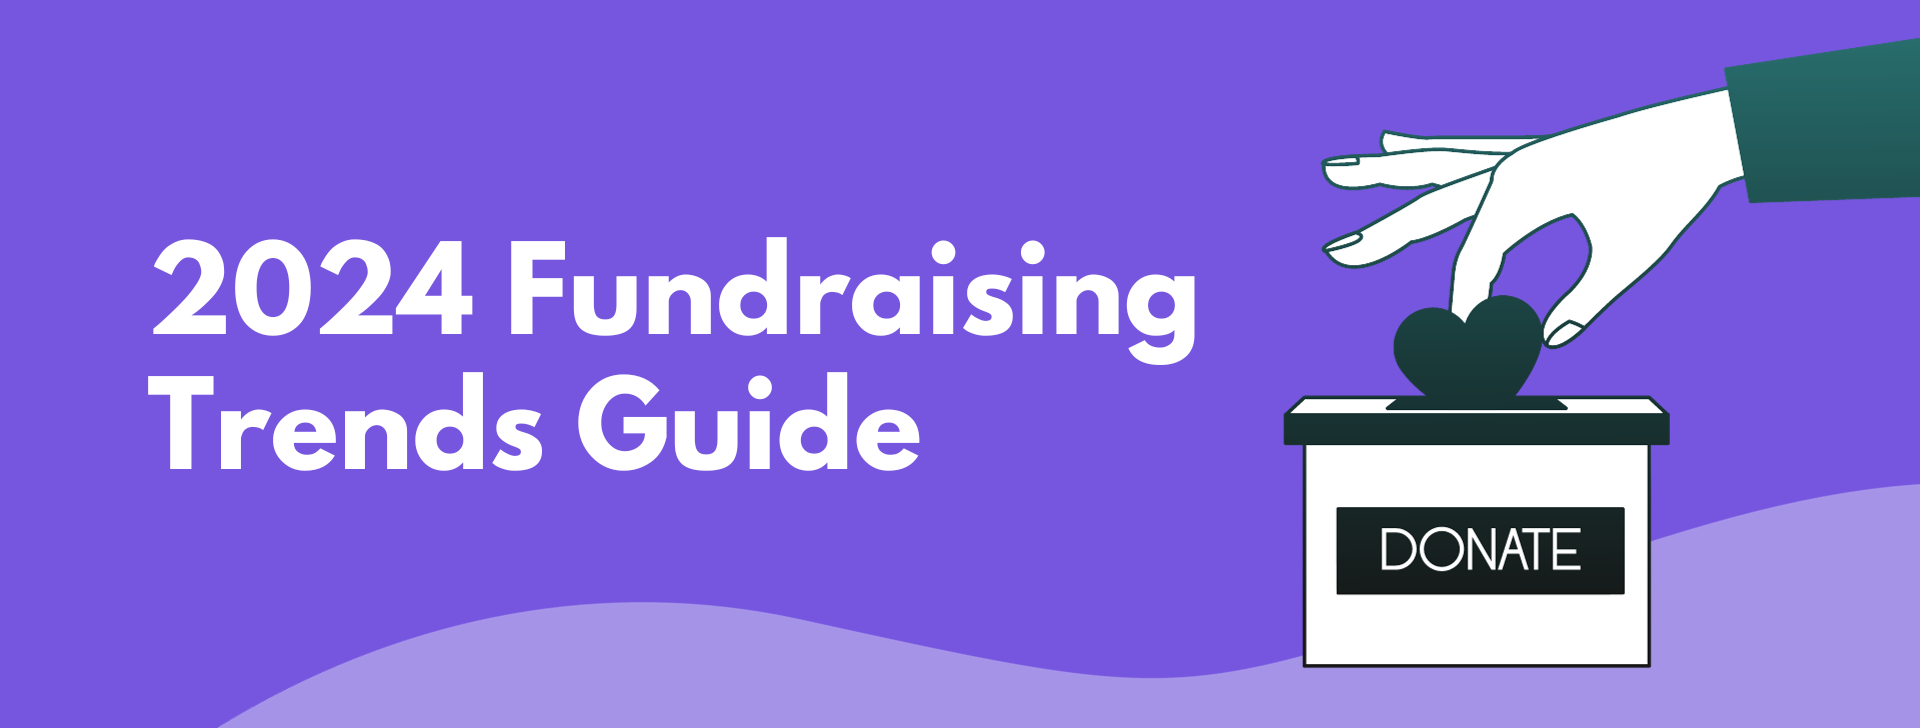 Asking for Donations: The Nonprofit's Guide [Free Templates